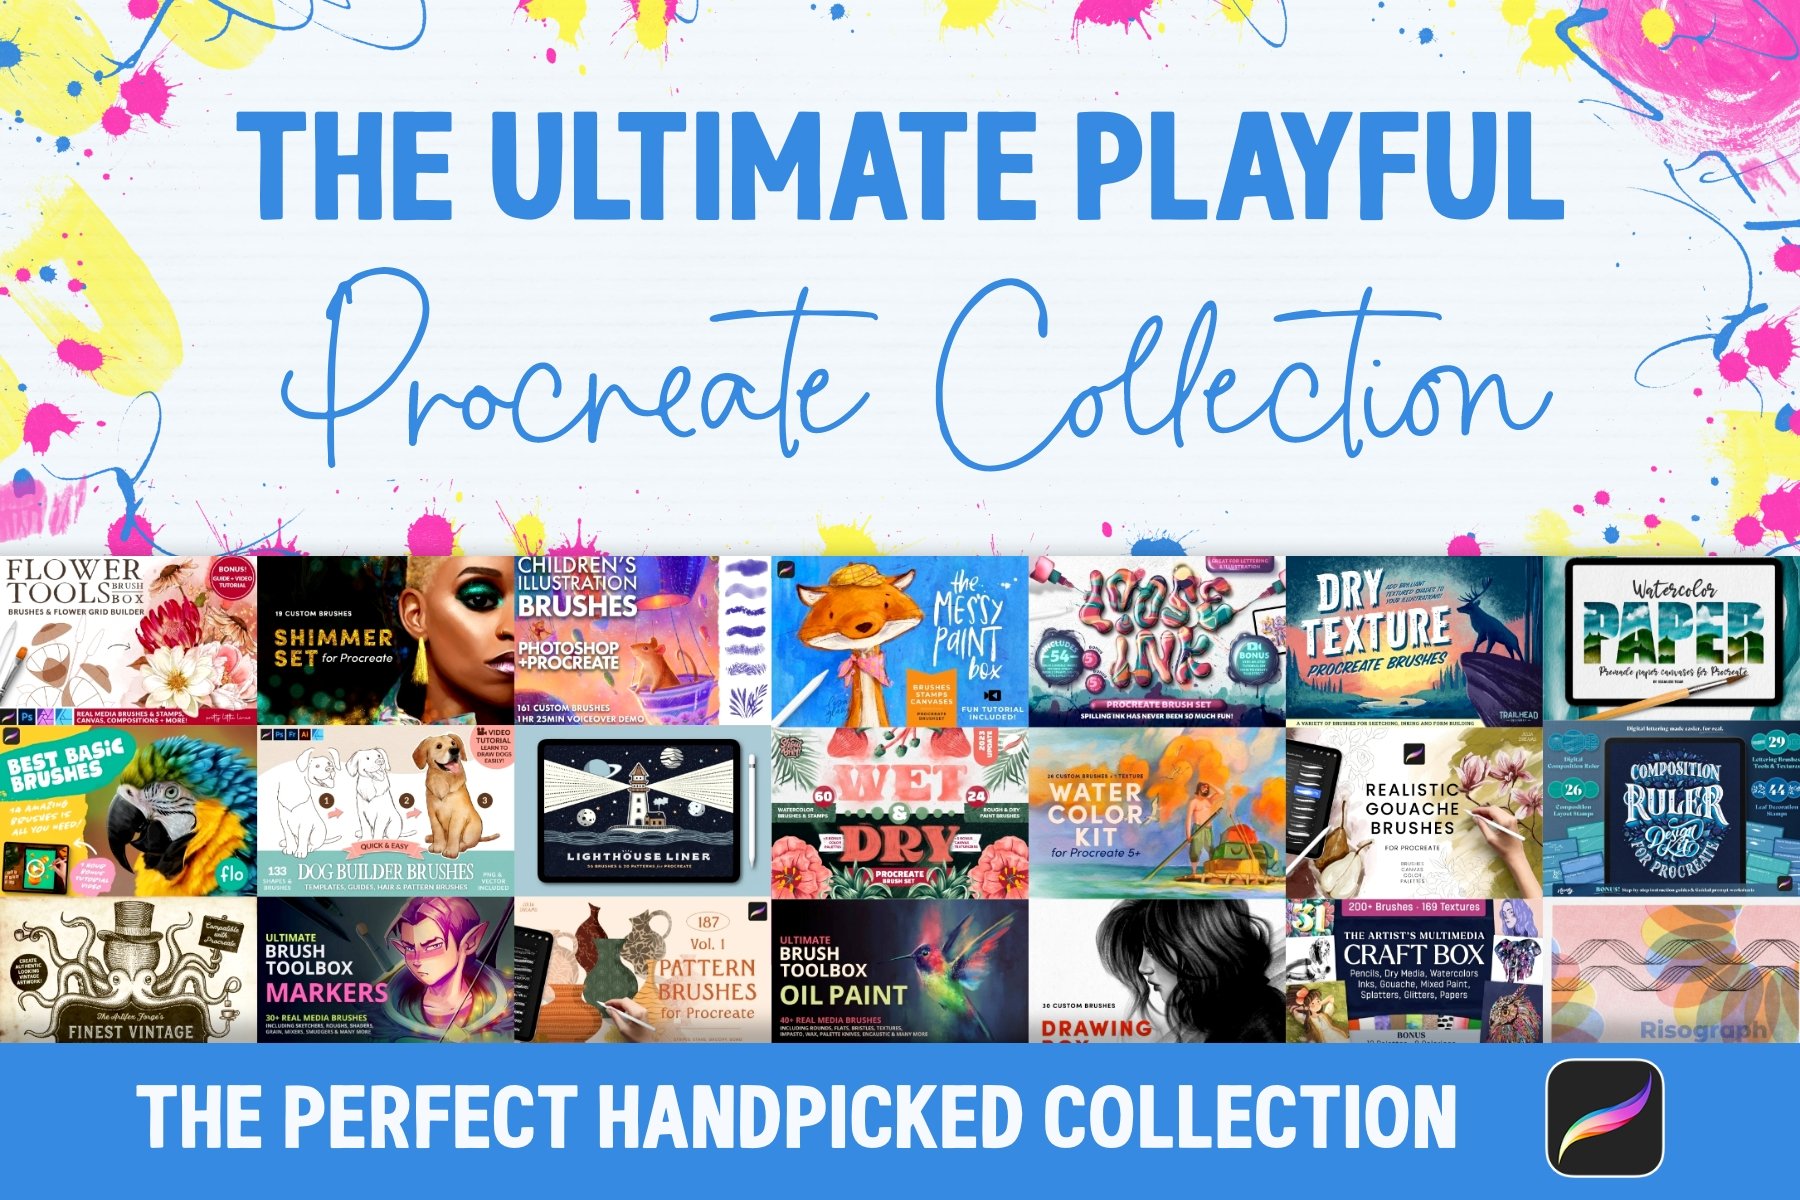 https://designcuts.b-cdn.net/wp-content/uploads/2023/08/Cover-The-ultimate-playful-procreate-collection.jpg